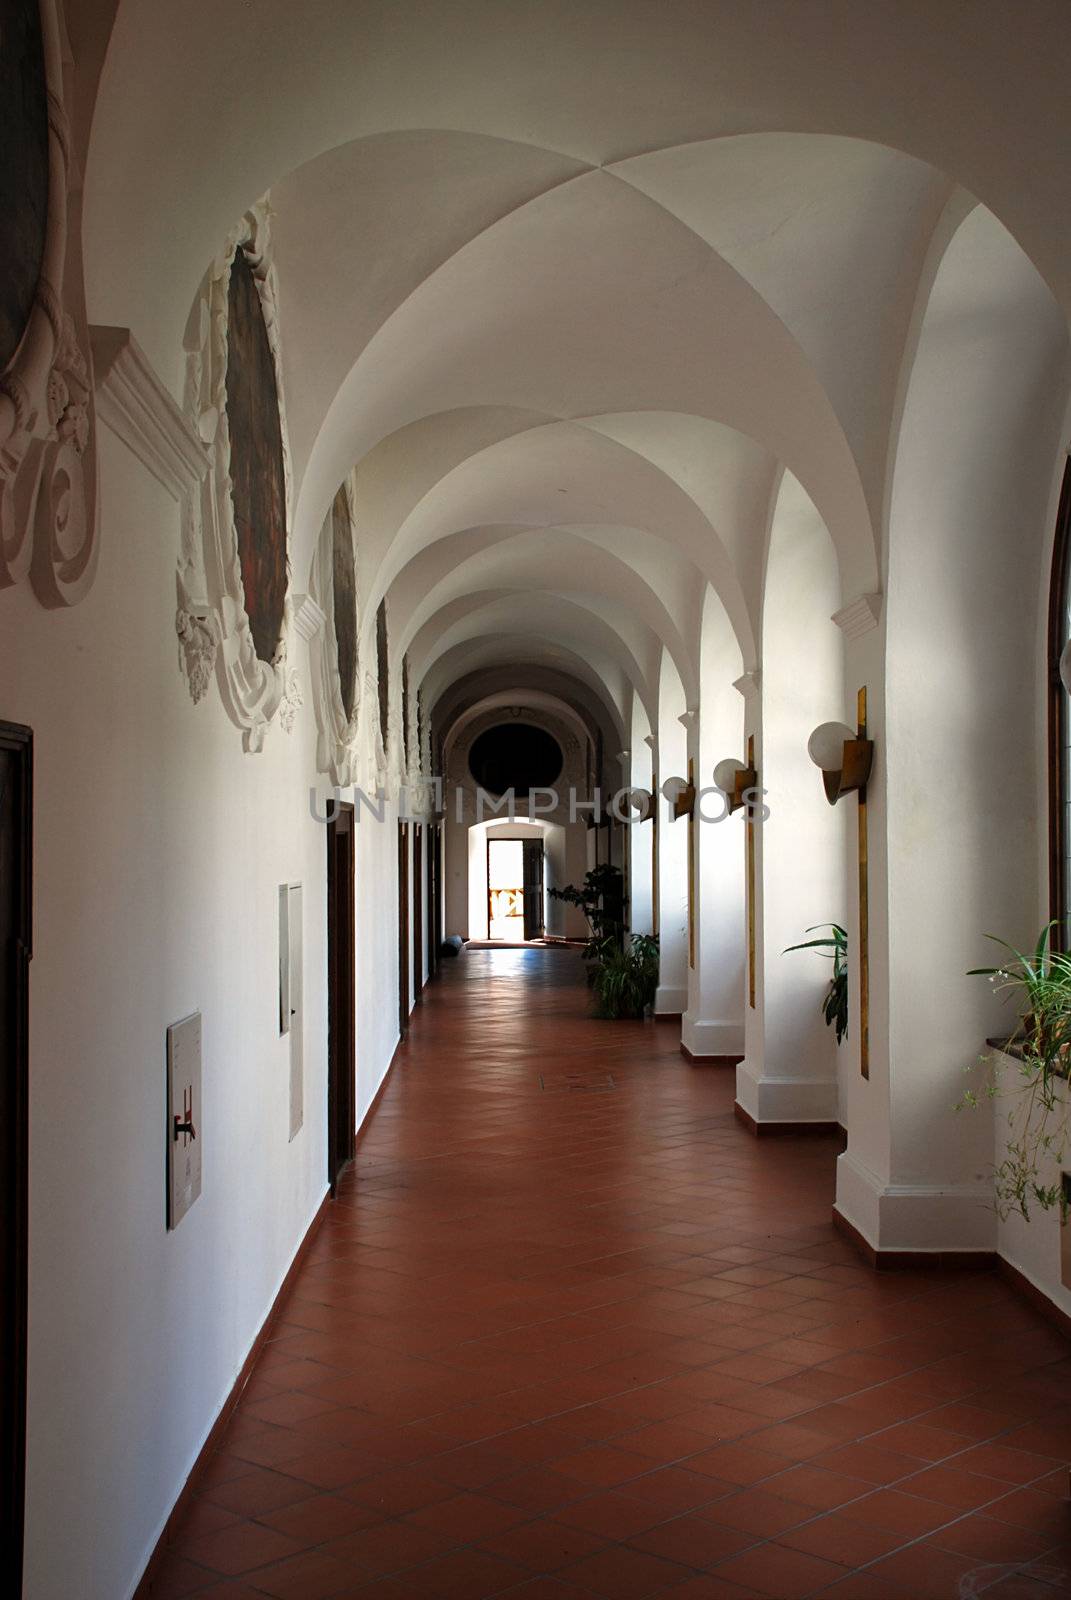 Light at the end of tunnel - cloister arcade